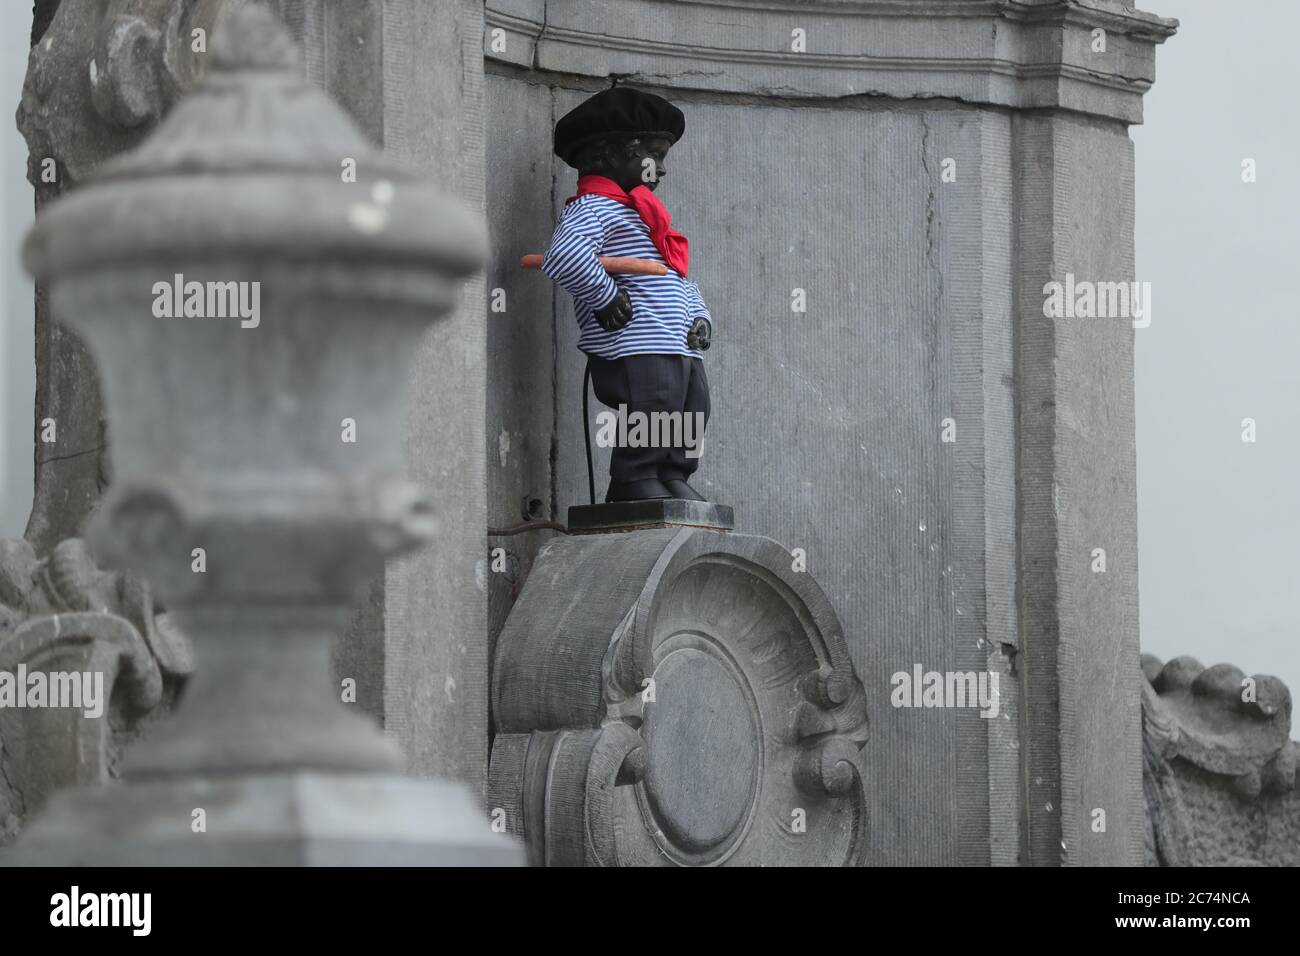 Brussels, Belgium. 14th July, 2020. The Manneken-Pis is seen in a suit with beret and baguette in Brussels, Belgium, July 14, 2020. Manneken-Pis, the symbol of Brussels folklore, gets costumes at major events. He wore a suit with beret and baguette on Tuesday to commemorate the French national day which falls on July 14 every year. Credit: Zheng Huansong/Xinhua/Alamy Live News Stock Photo